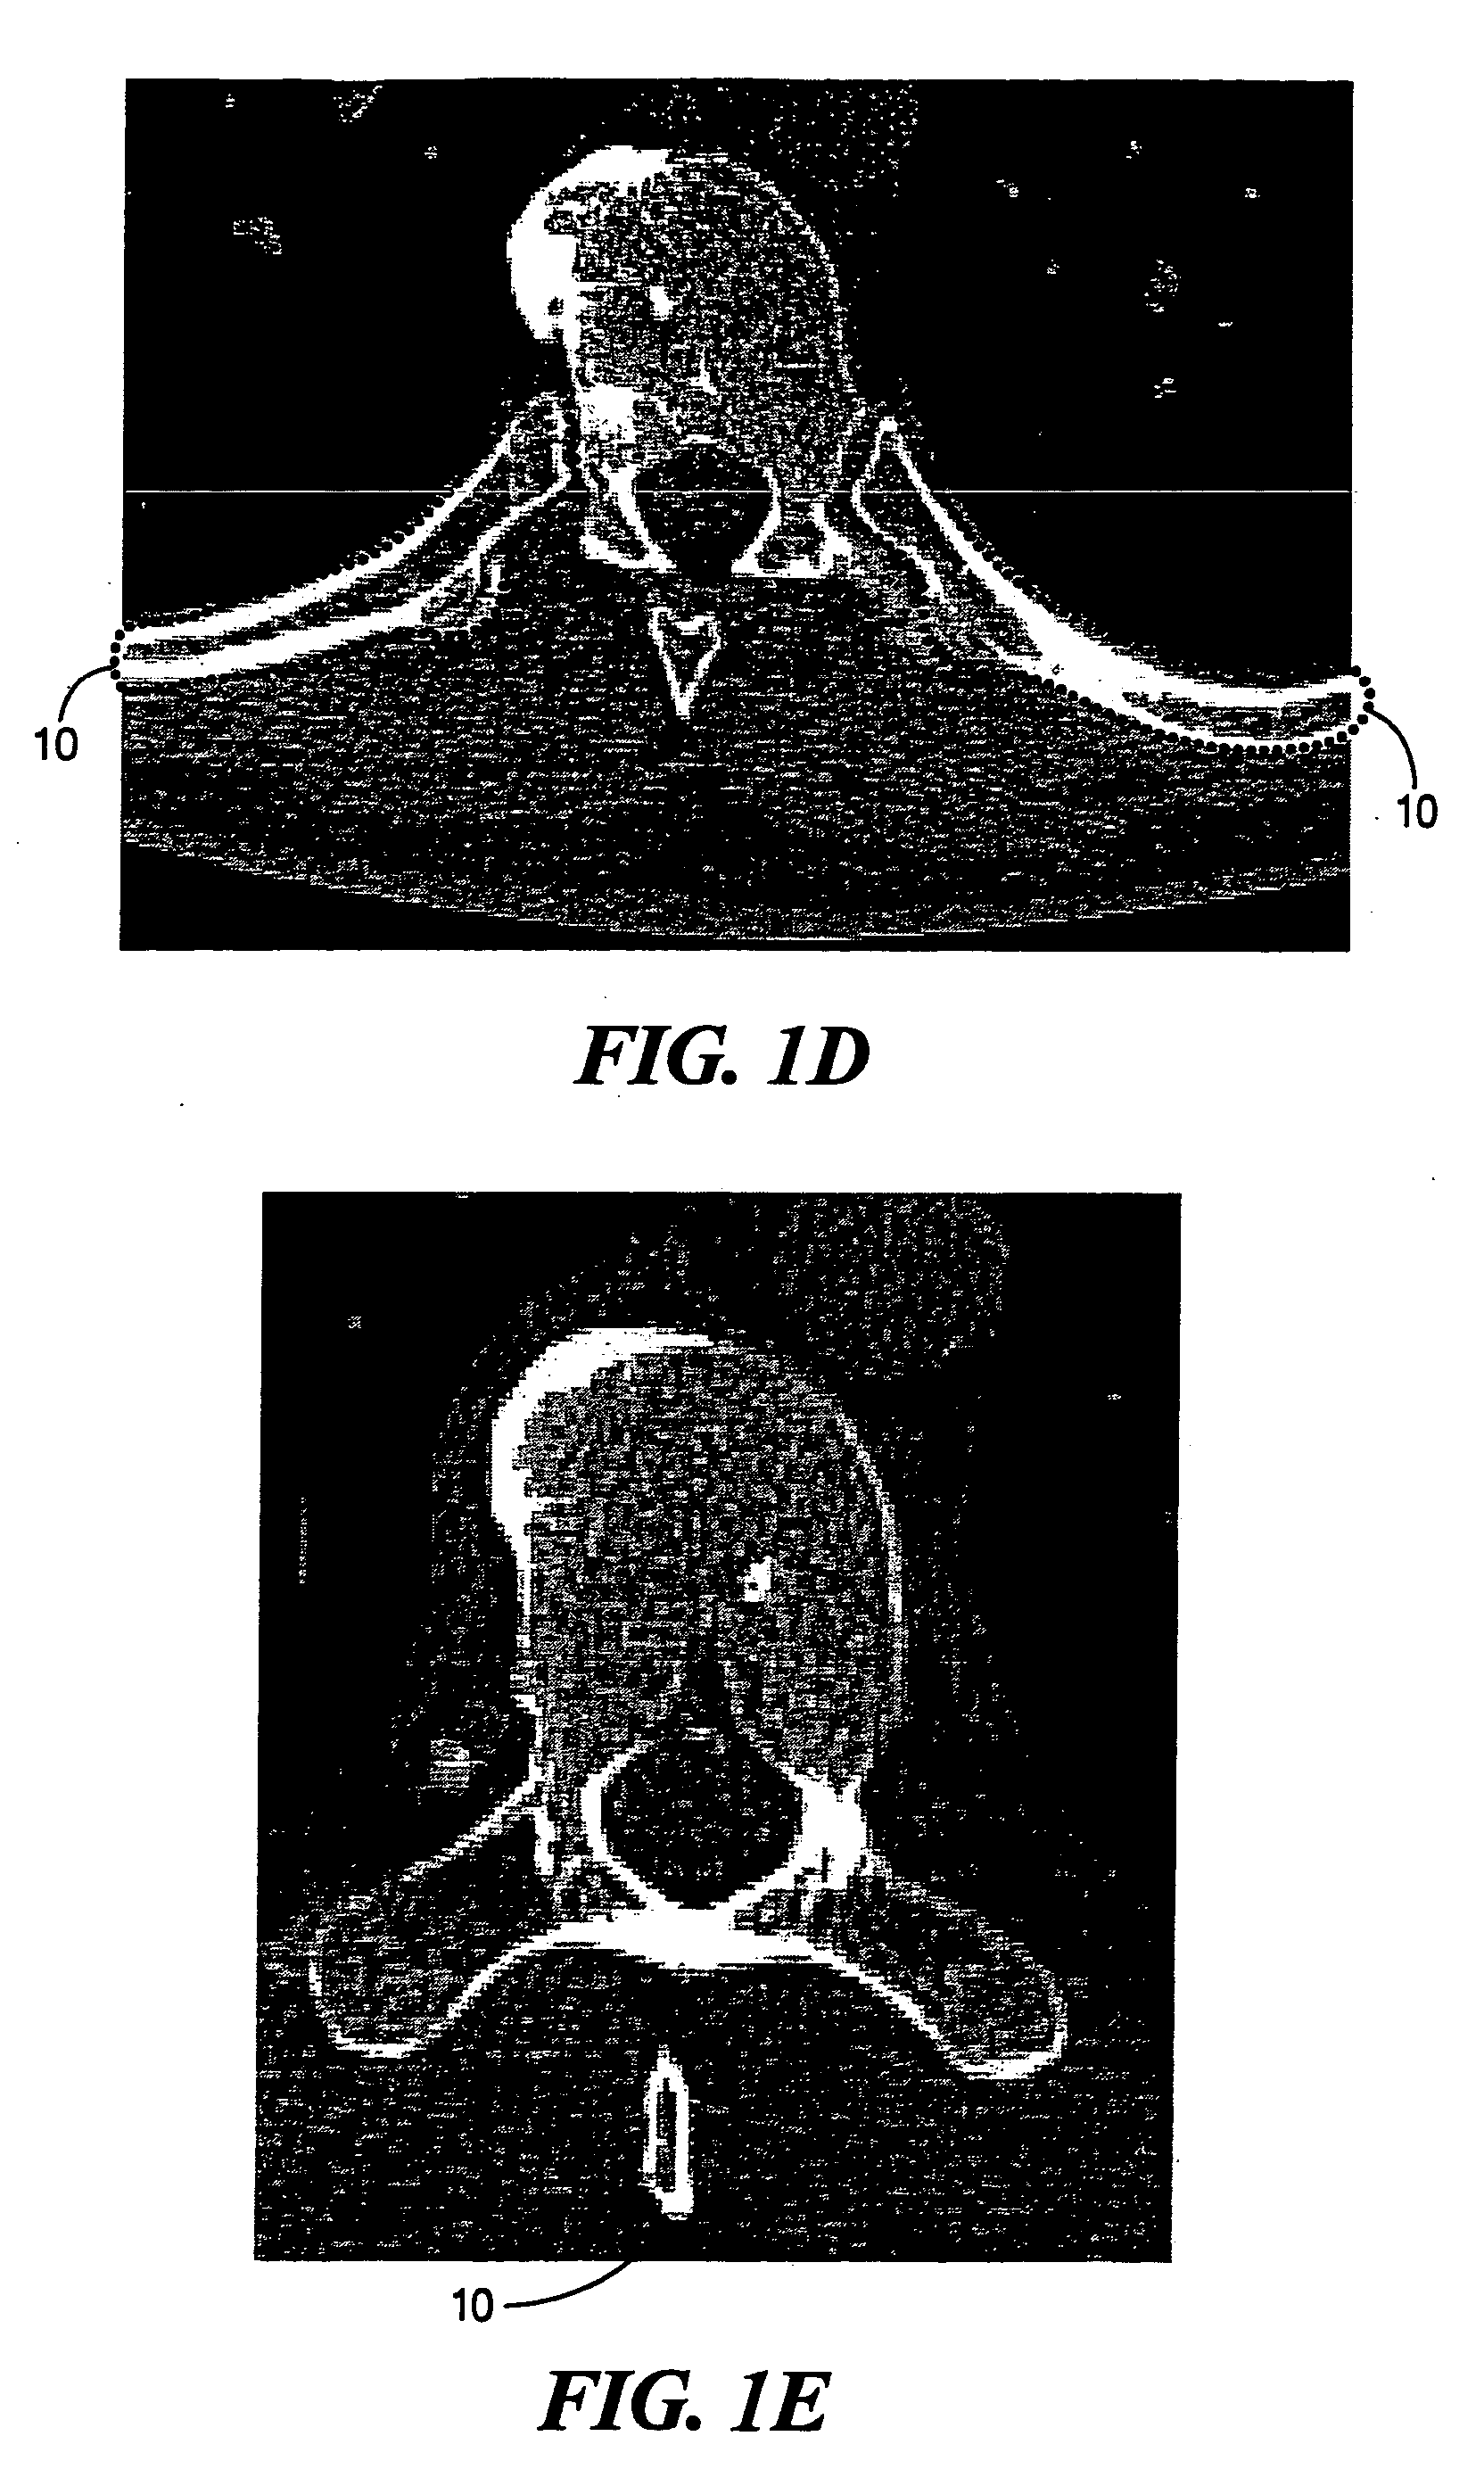 Method of incorporating prior knowledge in level set segmentation of 3D complex structures